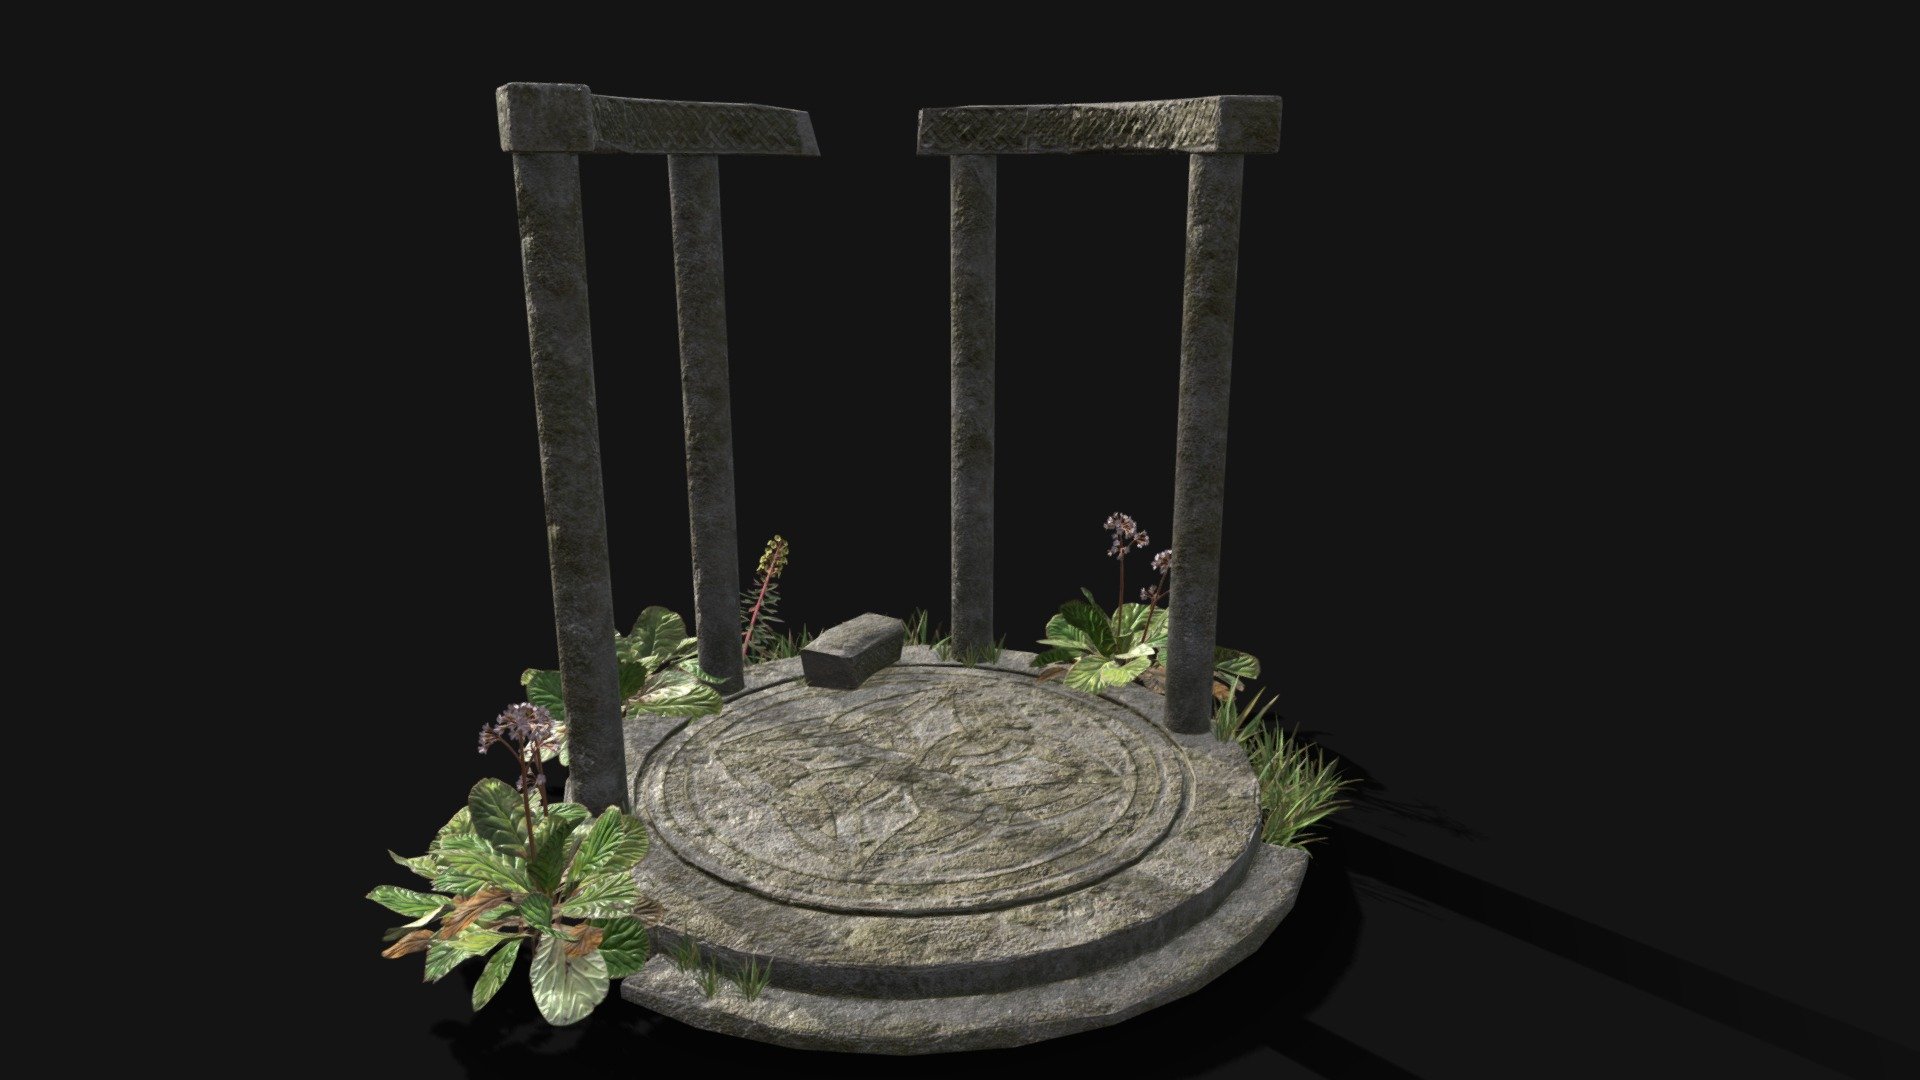 Stone Sanctuary 3D Model. This model contains the Stone Sanctuary itself 

All modeled in Maya, textured with Substance Painter.

The model was built to scale and is UV unwrapped properly. Contains one 4K texture set and three 1K sets for each type of plants.

⦁    26457 tris. 

⦁    Contains: .FBX .OBJ and .DAE

⦁    Model has clean topology. No Ngons.

⦁    Built to scale

⦁    Unwrapped UV Map

⦁    4K Texture set

⦁    High quality details

⦁    Based on real life references

⦁    Renders done in Marmoset Toolbag

Polycount: 

Verts 23716

Edges 36335

Faces 14151

Tris 26457 

If you have any questions please feel free to ask me 3d model